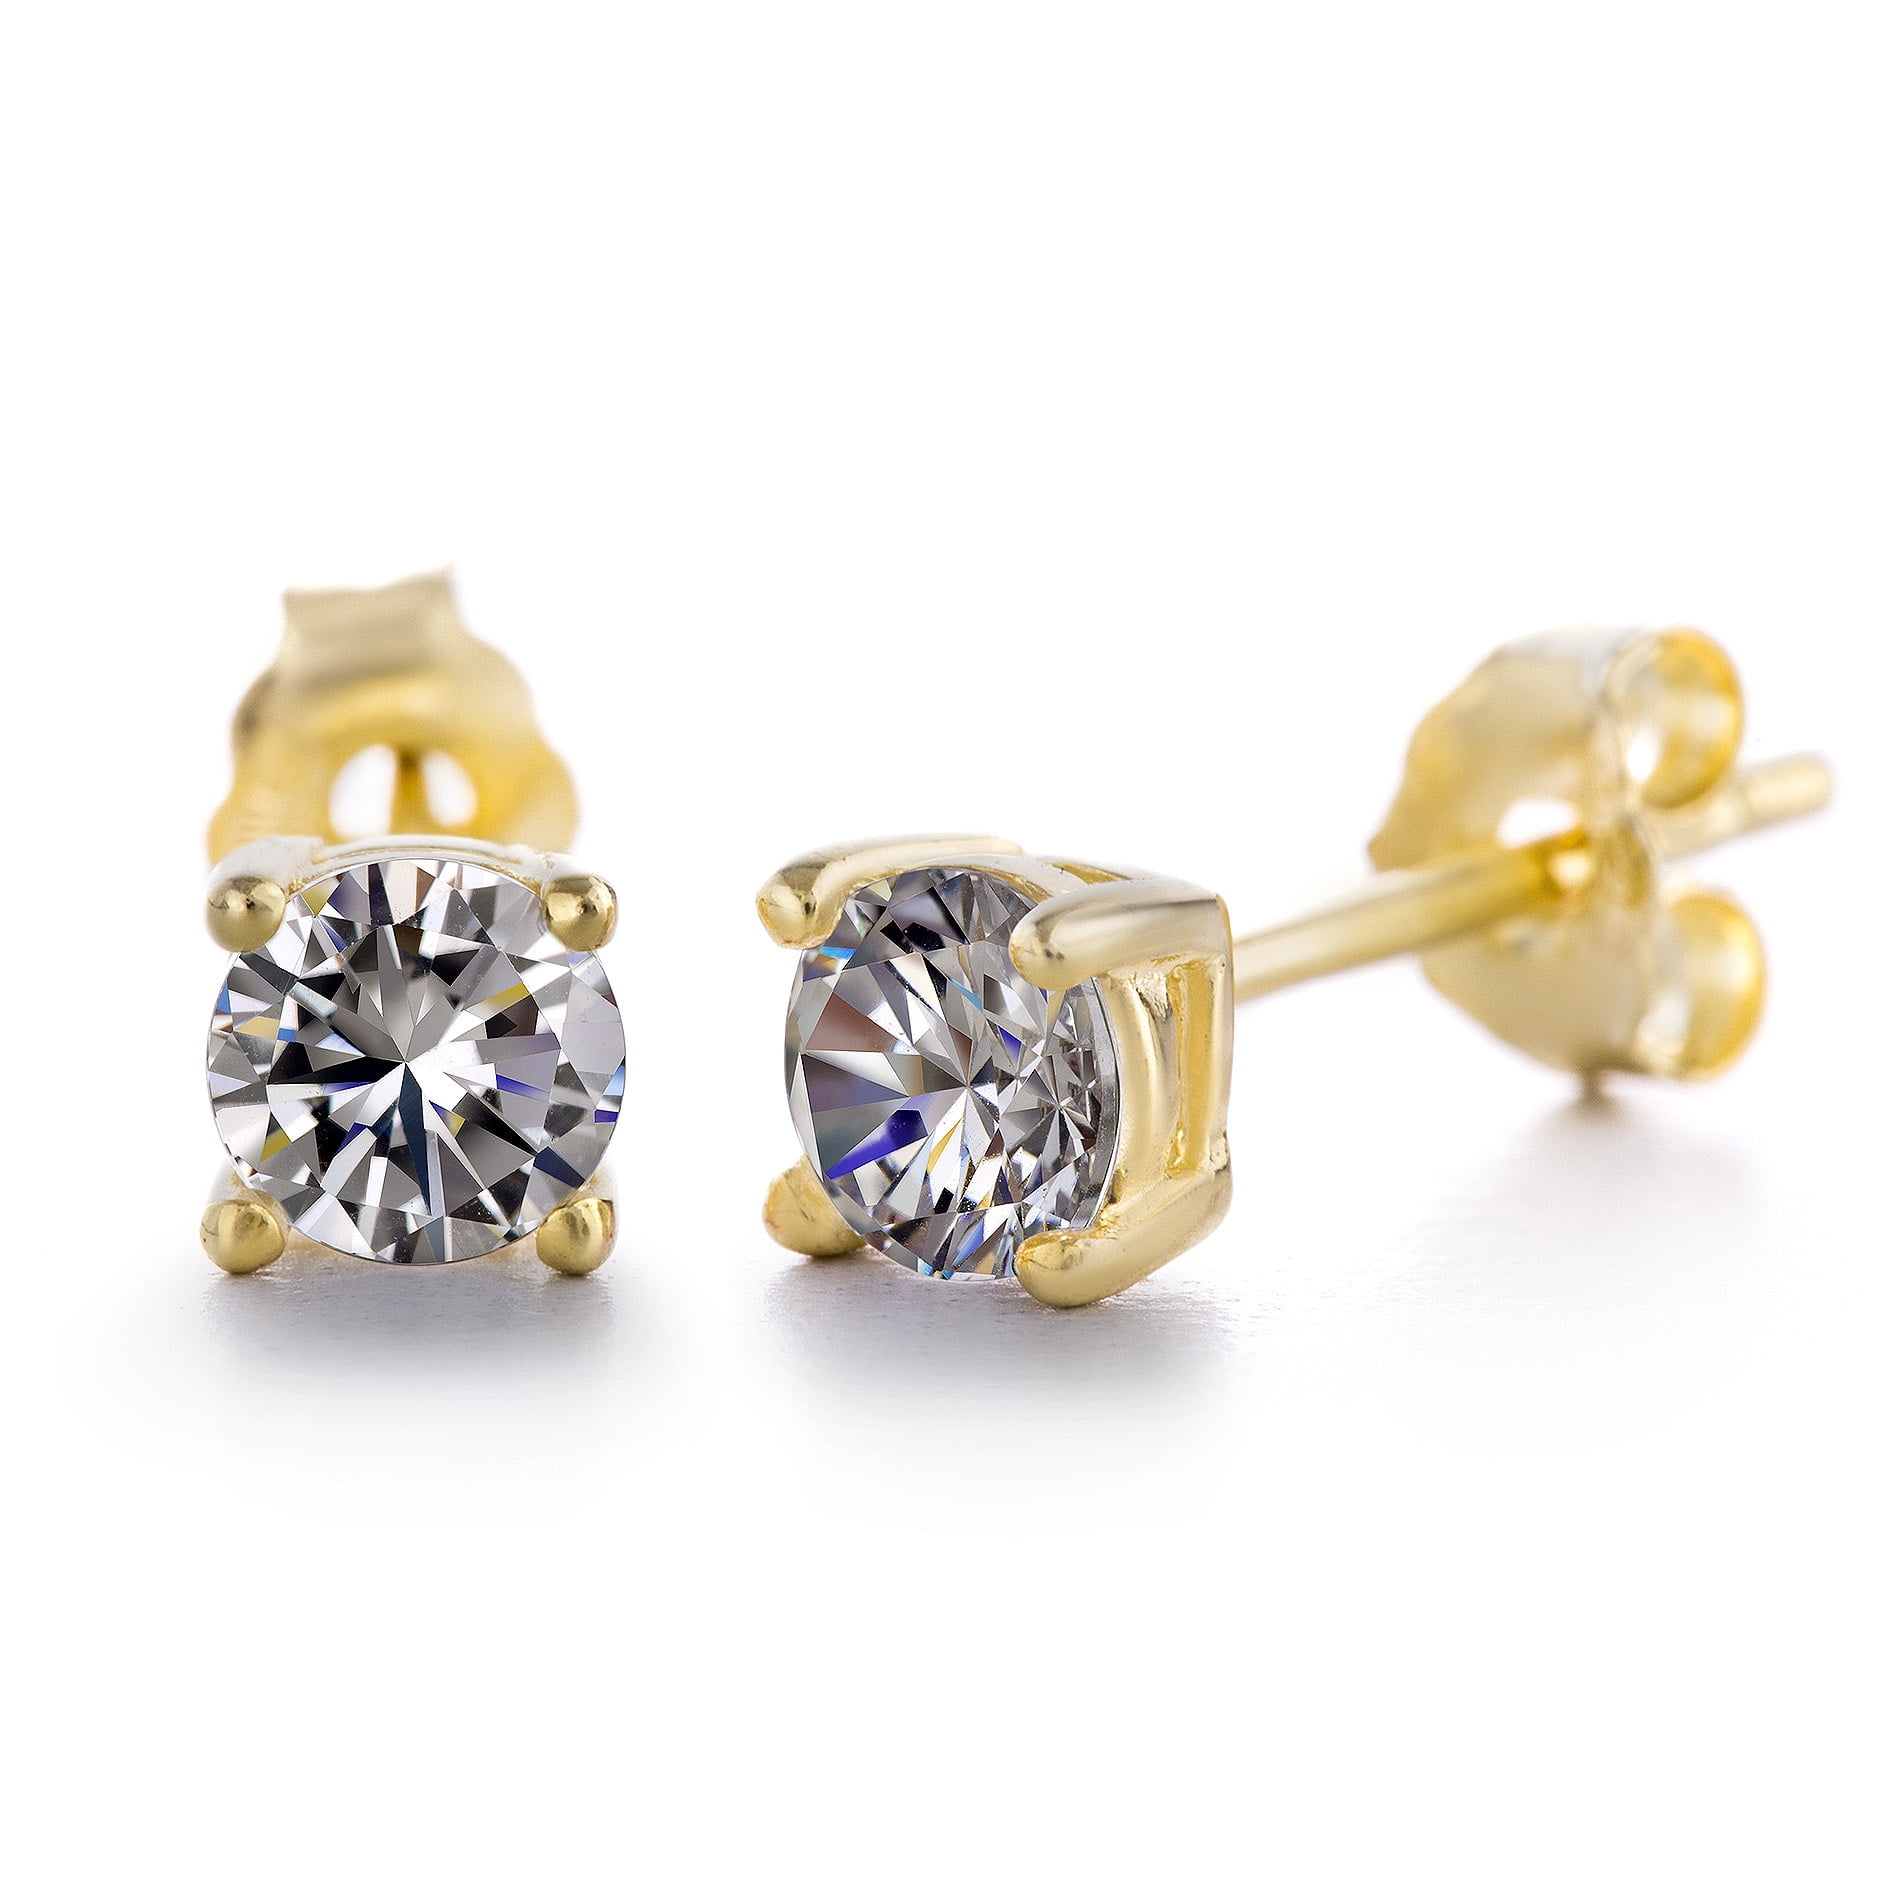 Details about   14k 14kt Yellow Gold Madi K CZ Oval Post Earrings 